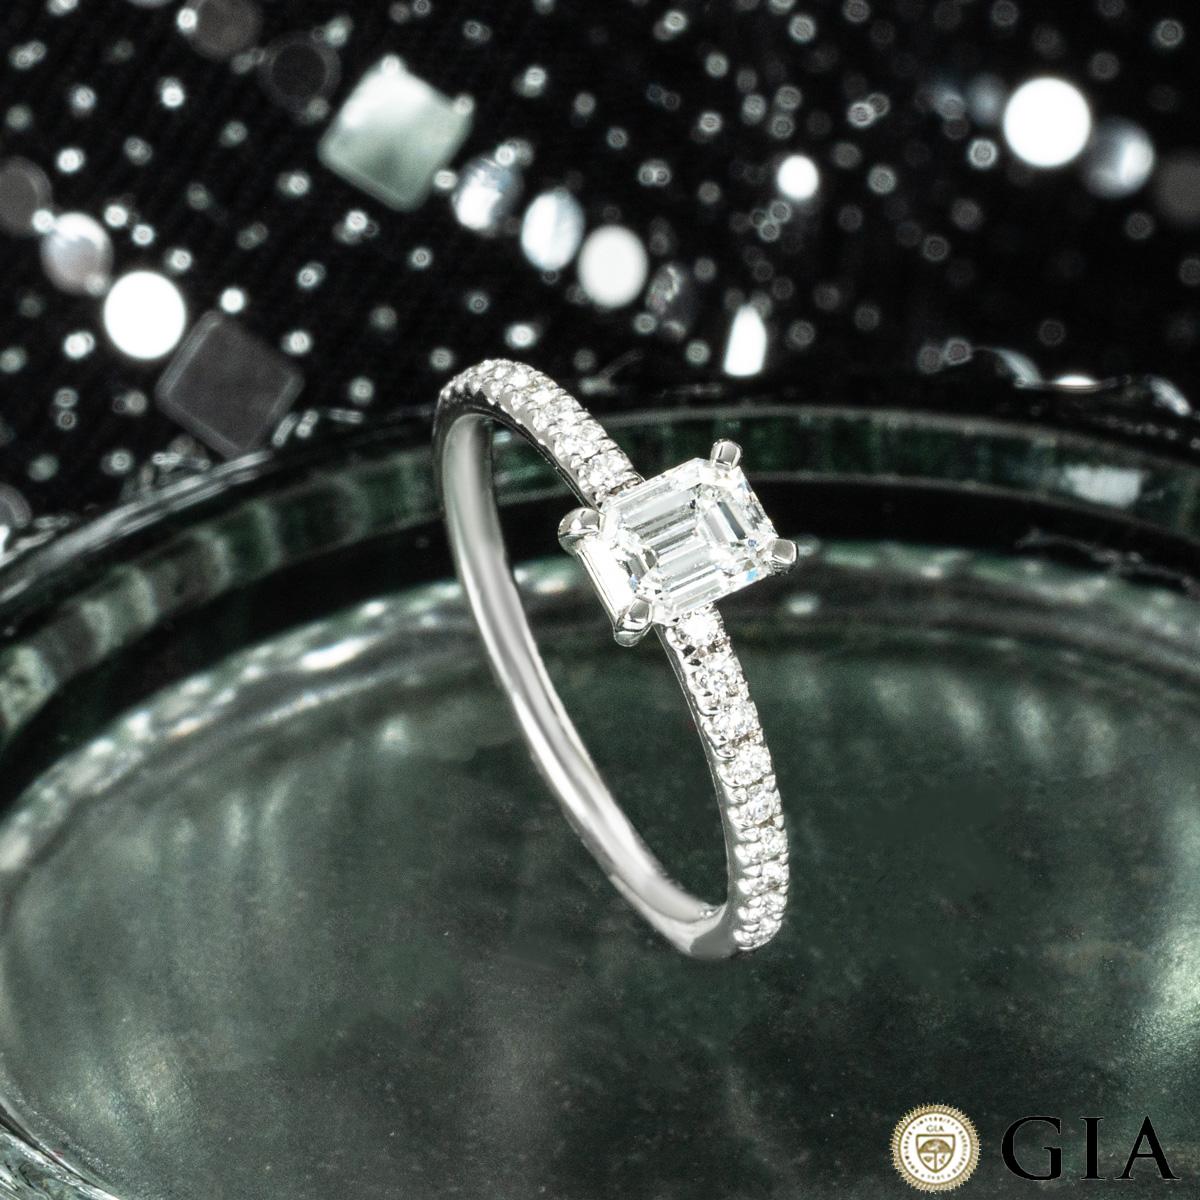 Gia Certified White Gold Emerald Cut Diamond Ring 0.59 Carat D/VS1 For Sale 3